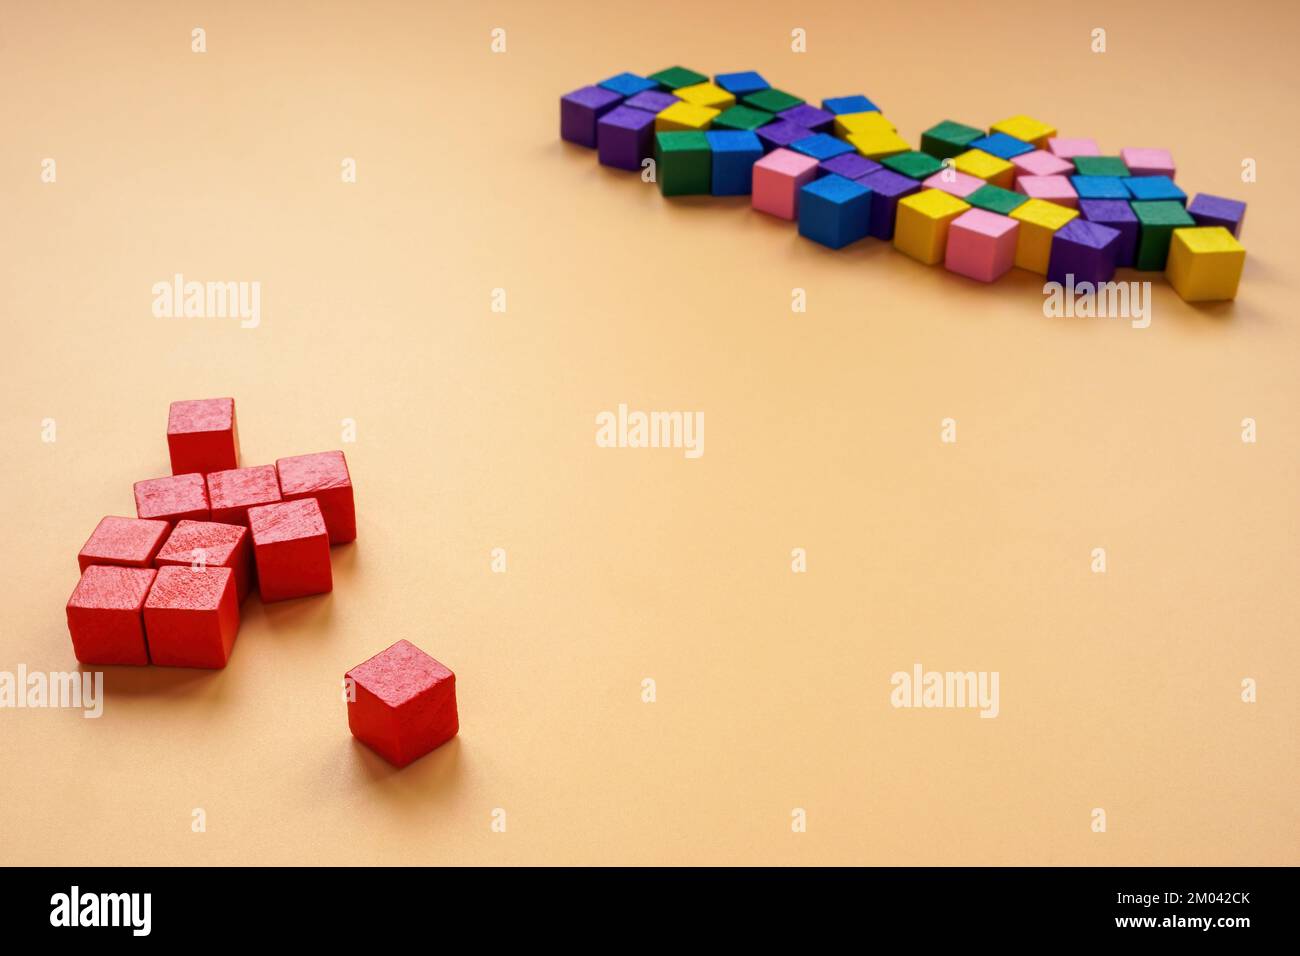 Affinity bias concept. Red cubes lie separately from other colors. Stock Photo